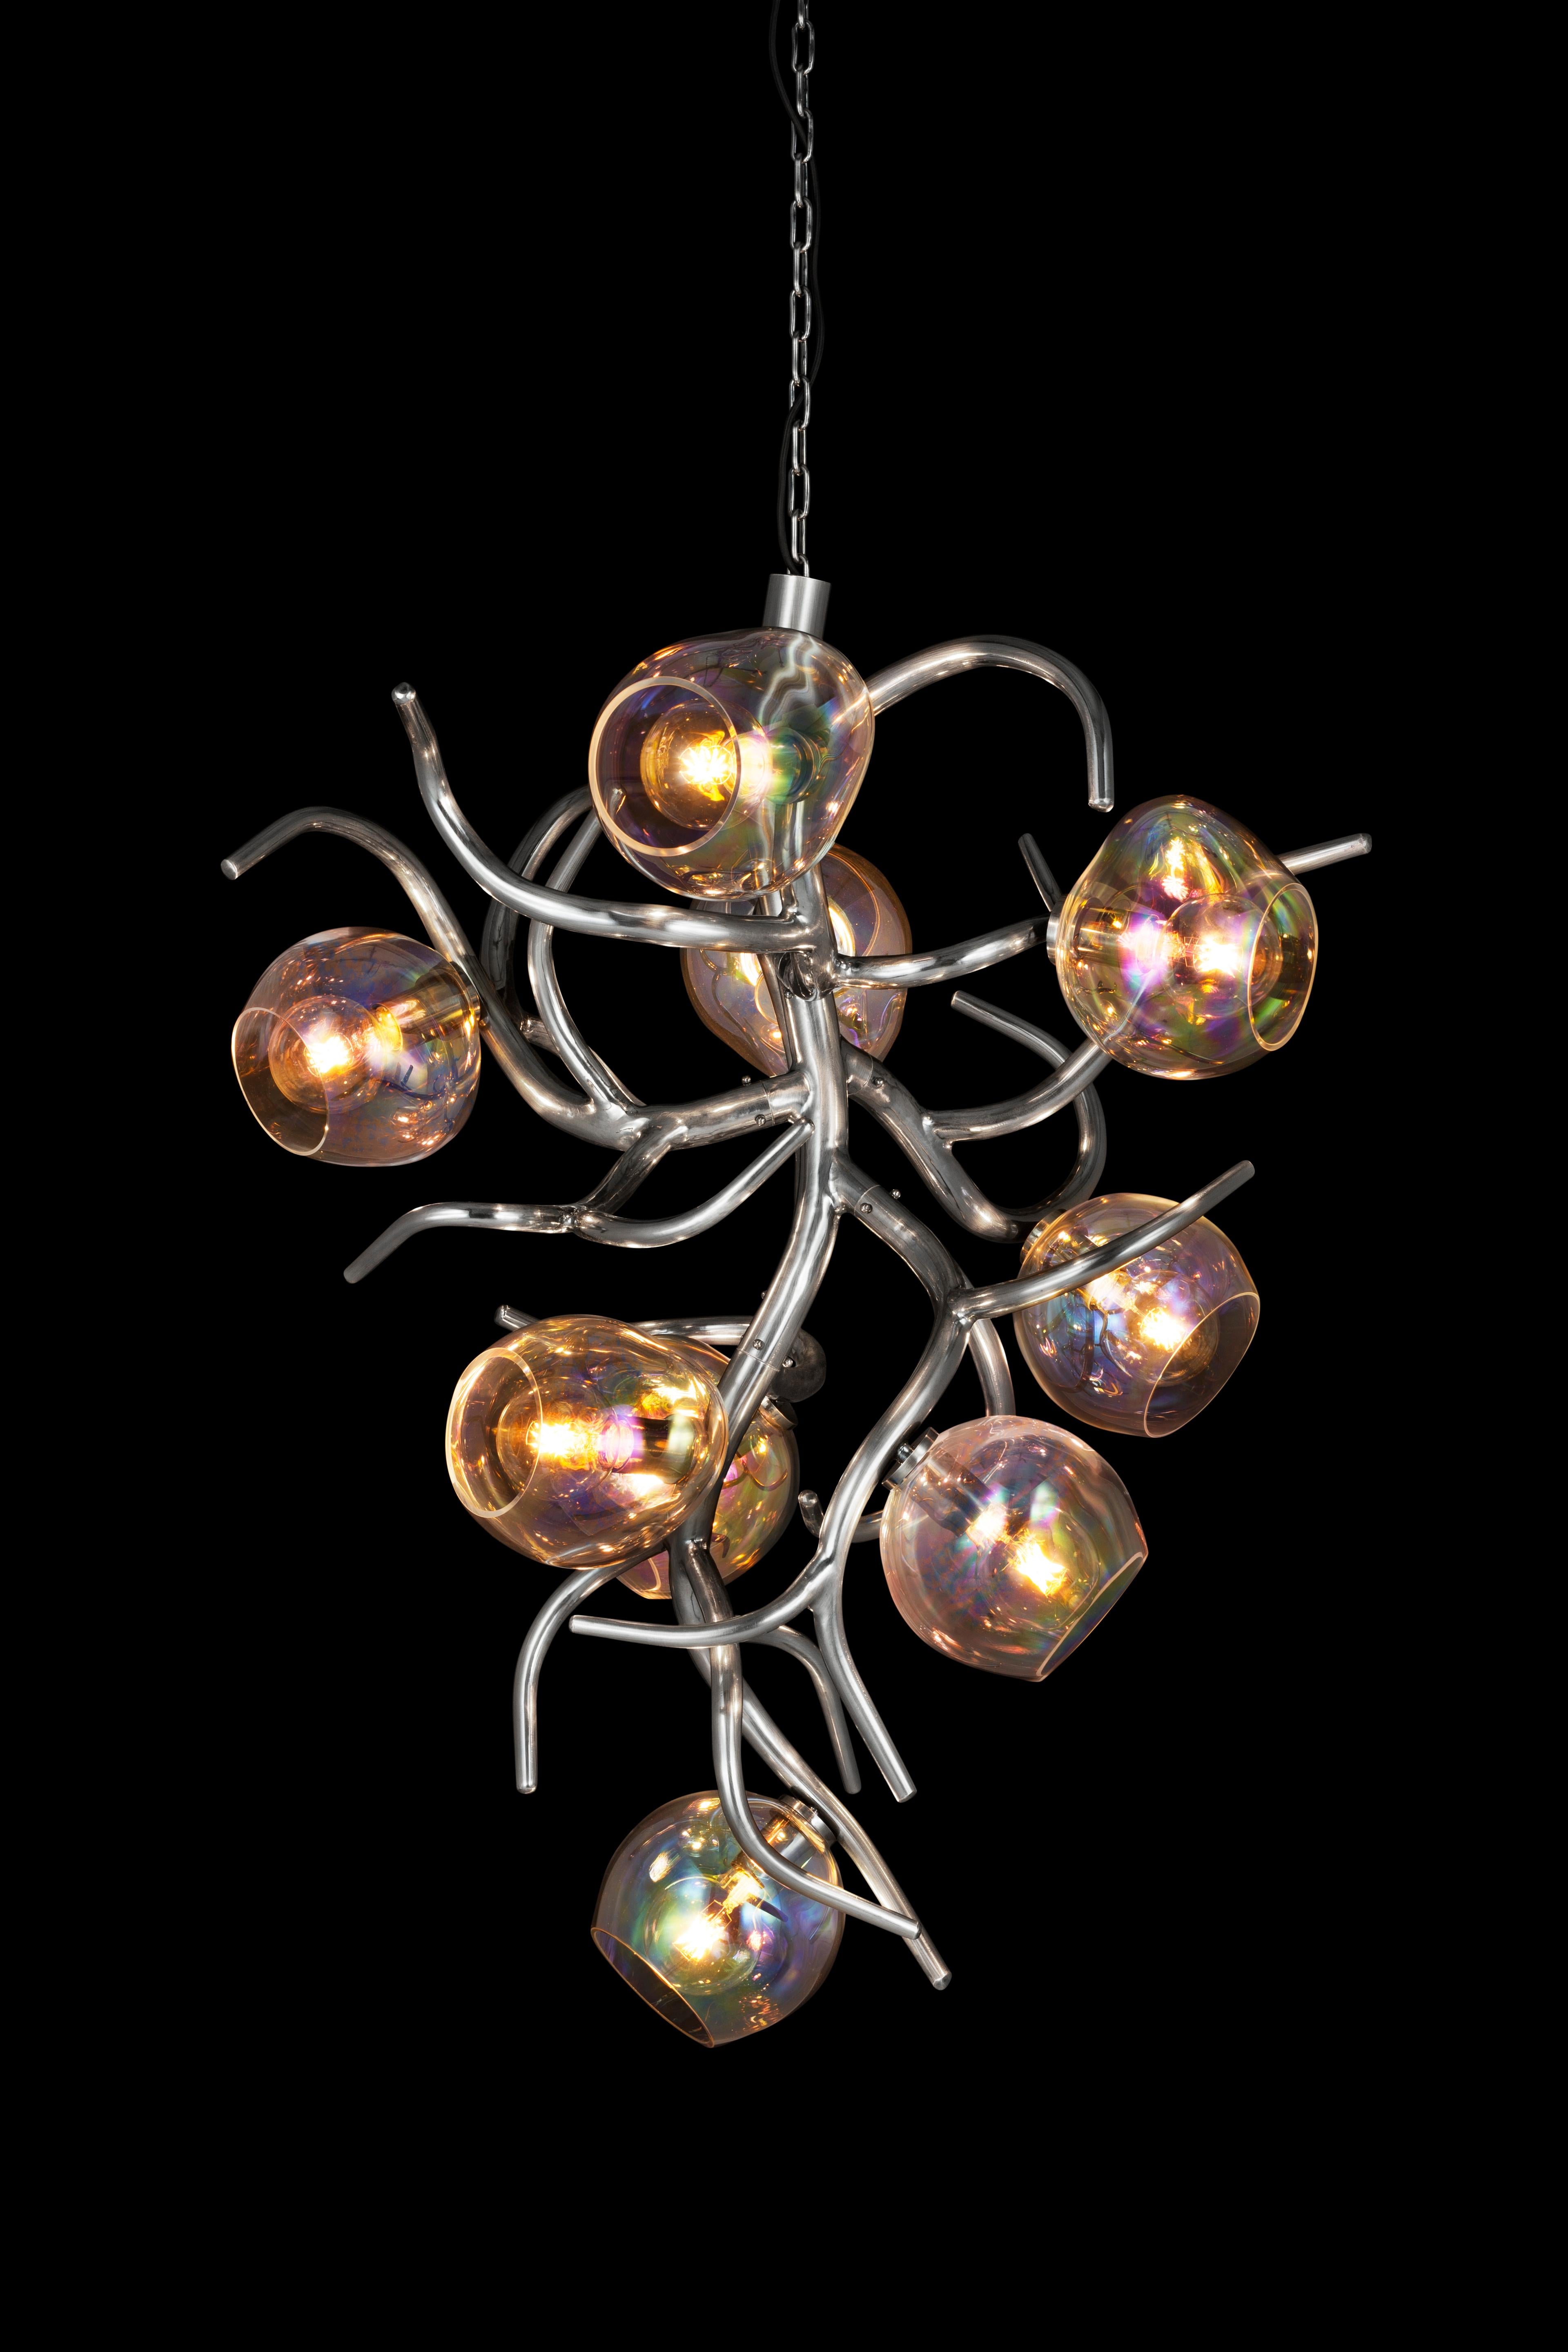 The Ersa is available in this modern chandelier conical with iridescent glass spheres, created to bring light and character into an interior. Crafted by our craftsman and glassblowers into a beautifully organic shape, bursting with life and energy,